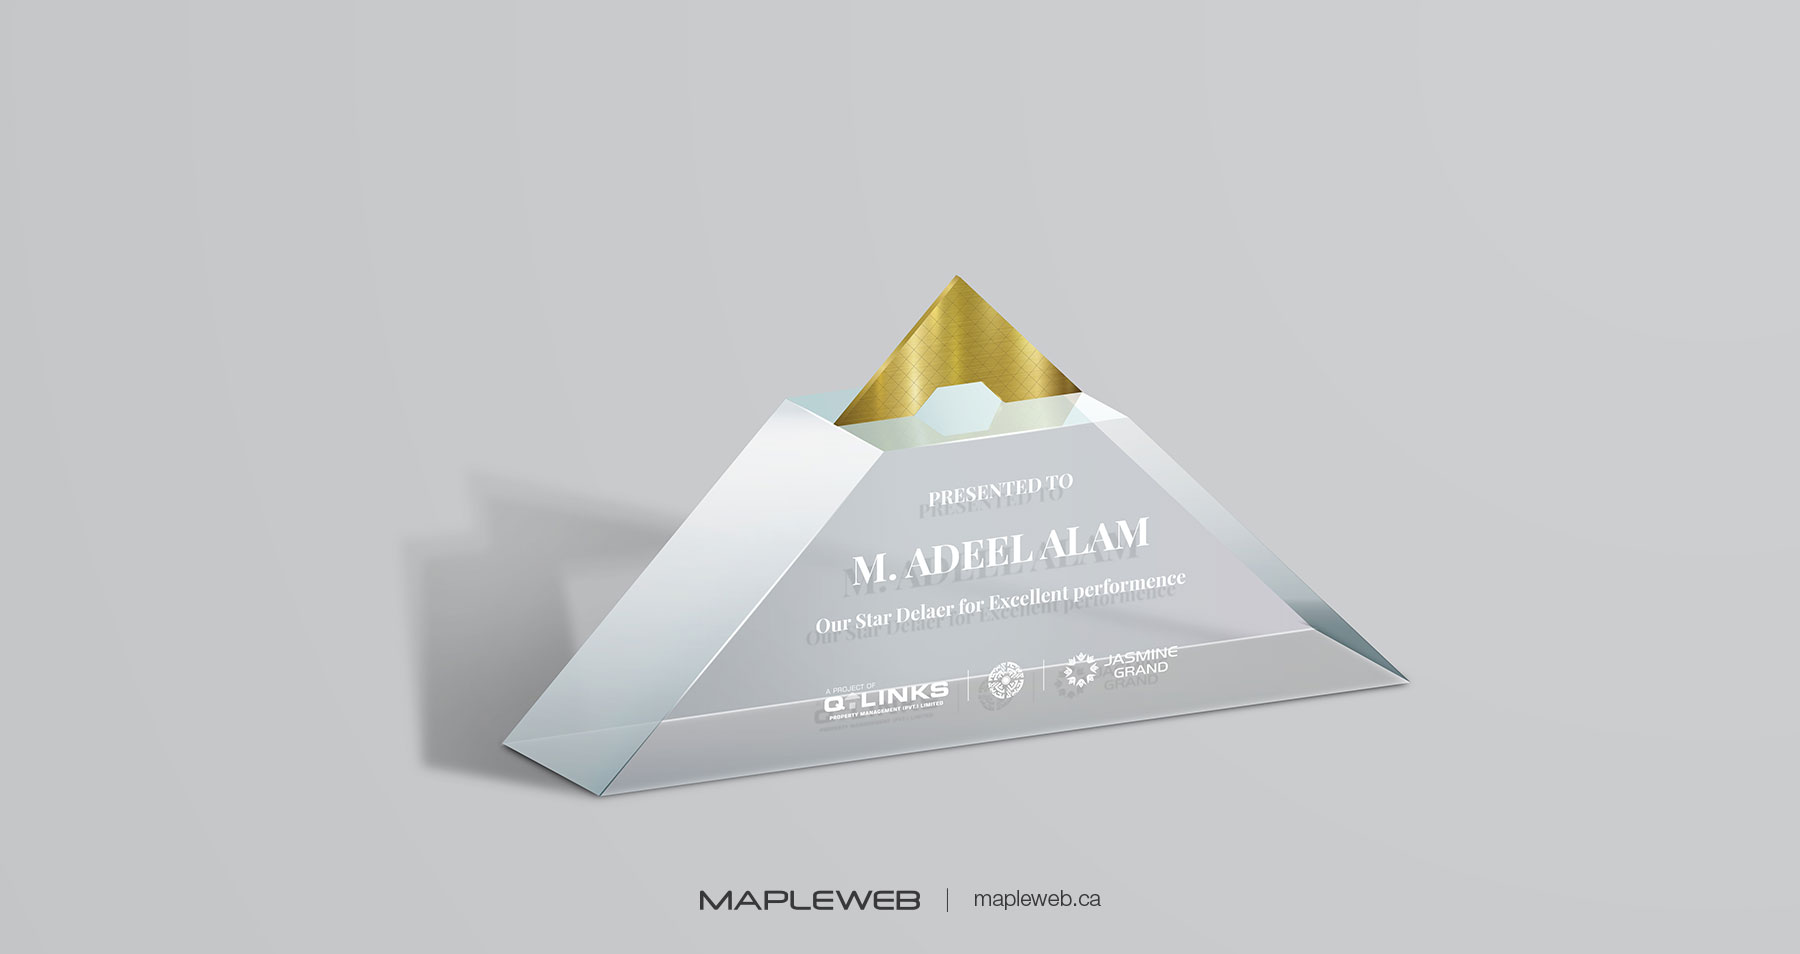 Jasmine Grand Mall Award Shield For Excellent Performance Brand design by Mapleweb